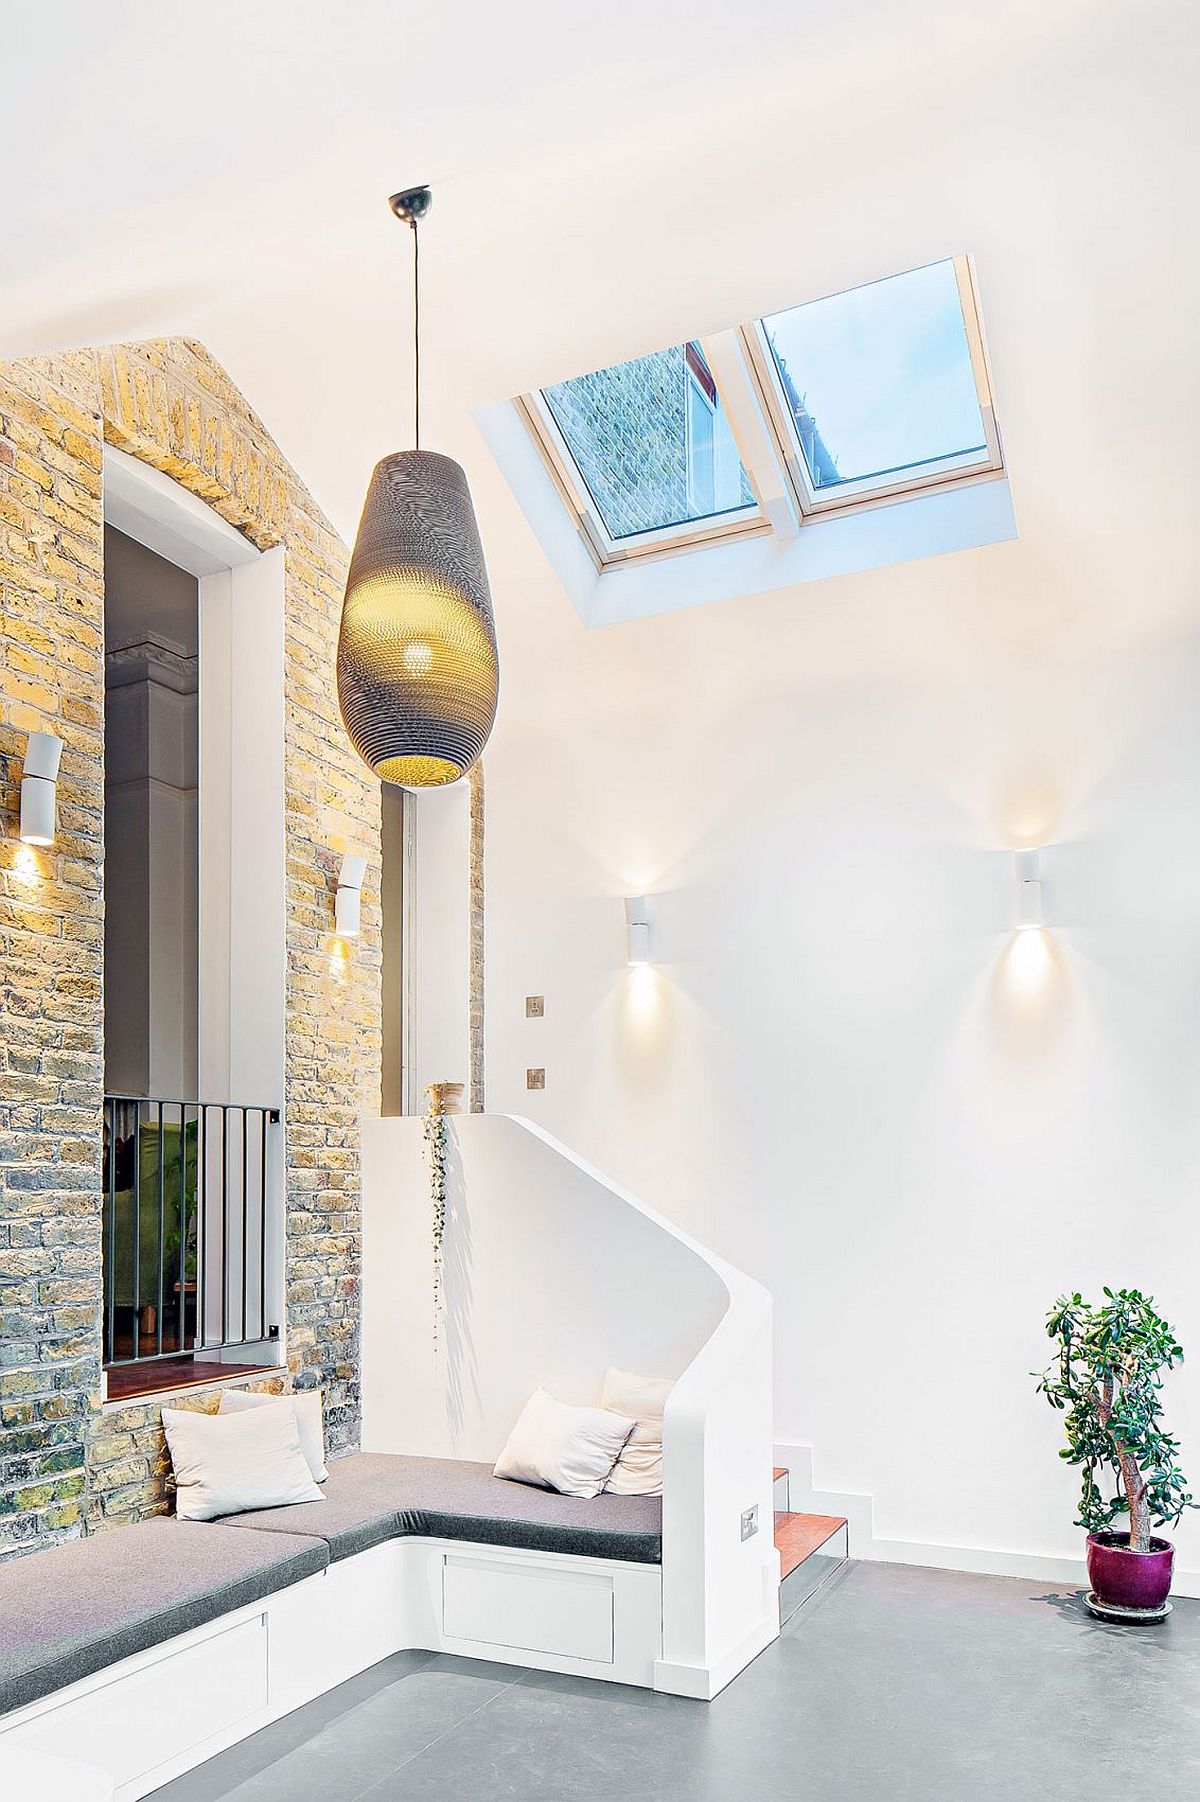 High ceiling of the modern extension gives it a spacious appeal